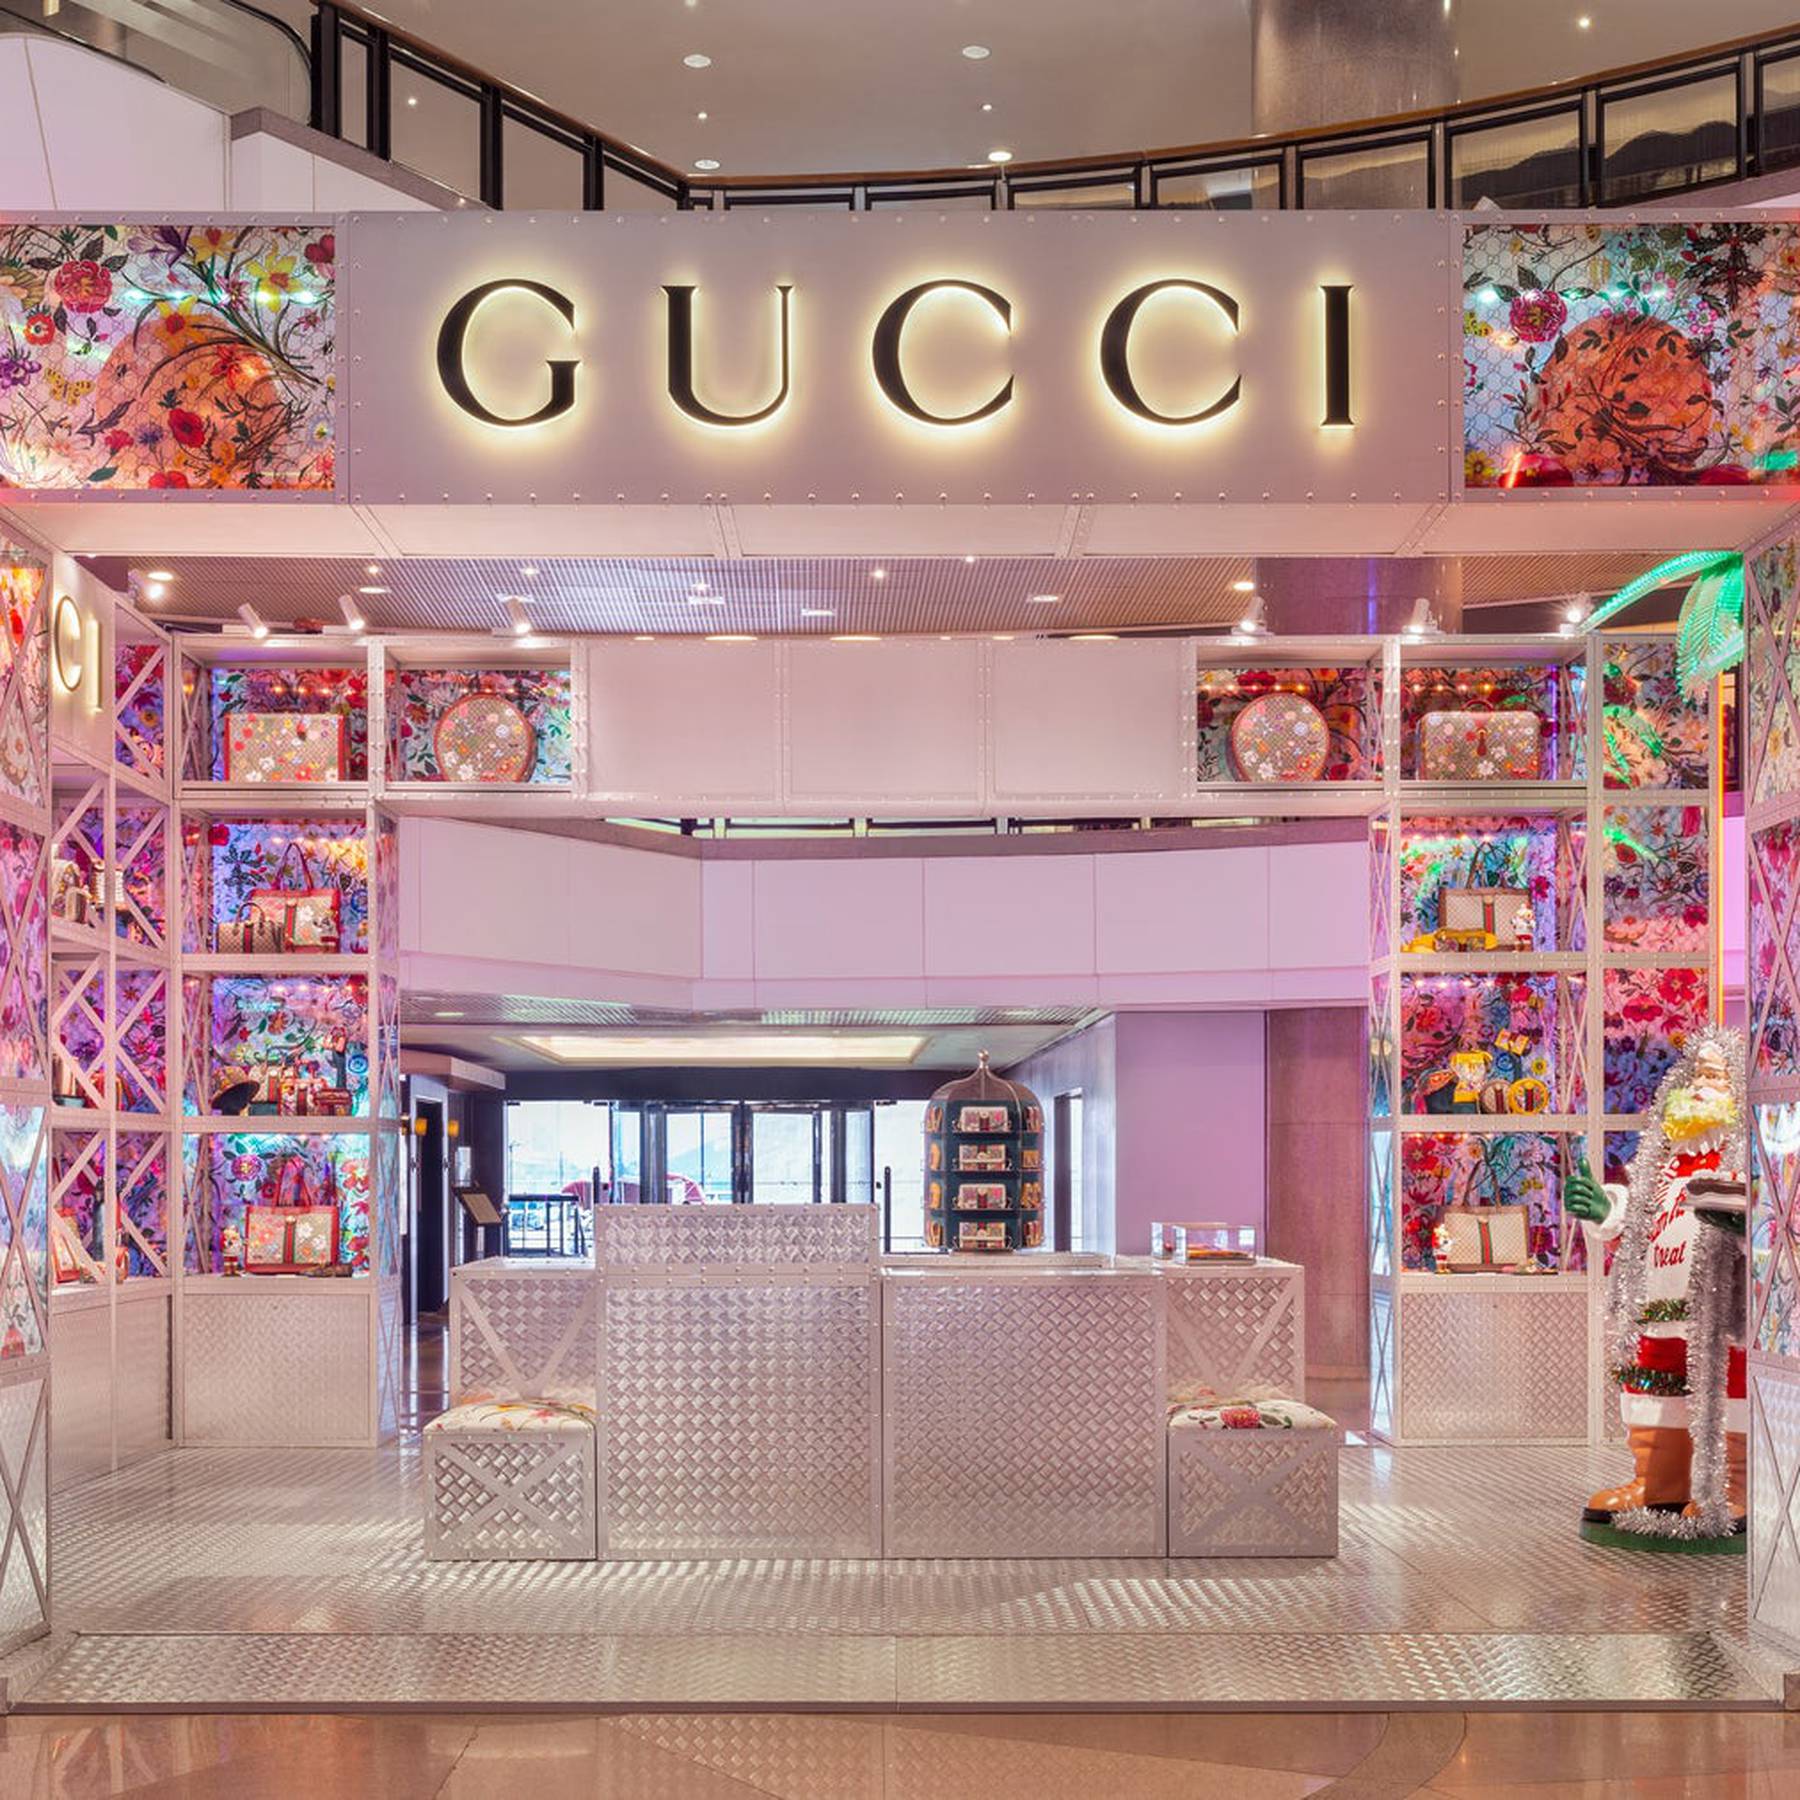 What It's Like to Buy Gucci Bag in Milan, Italy - Shopping Experience 